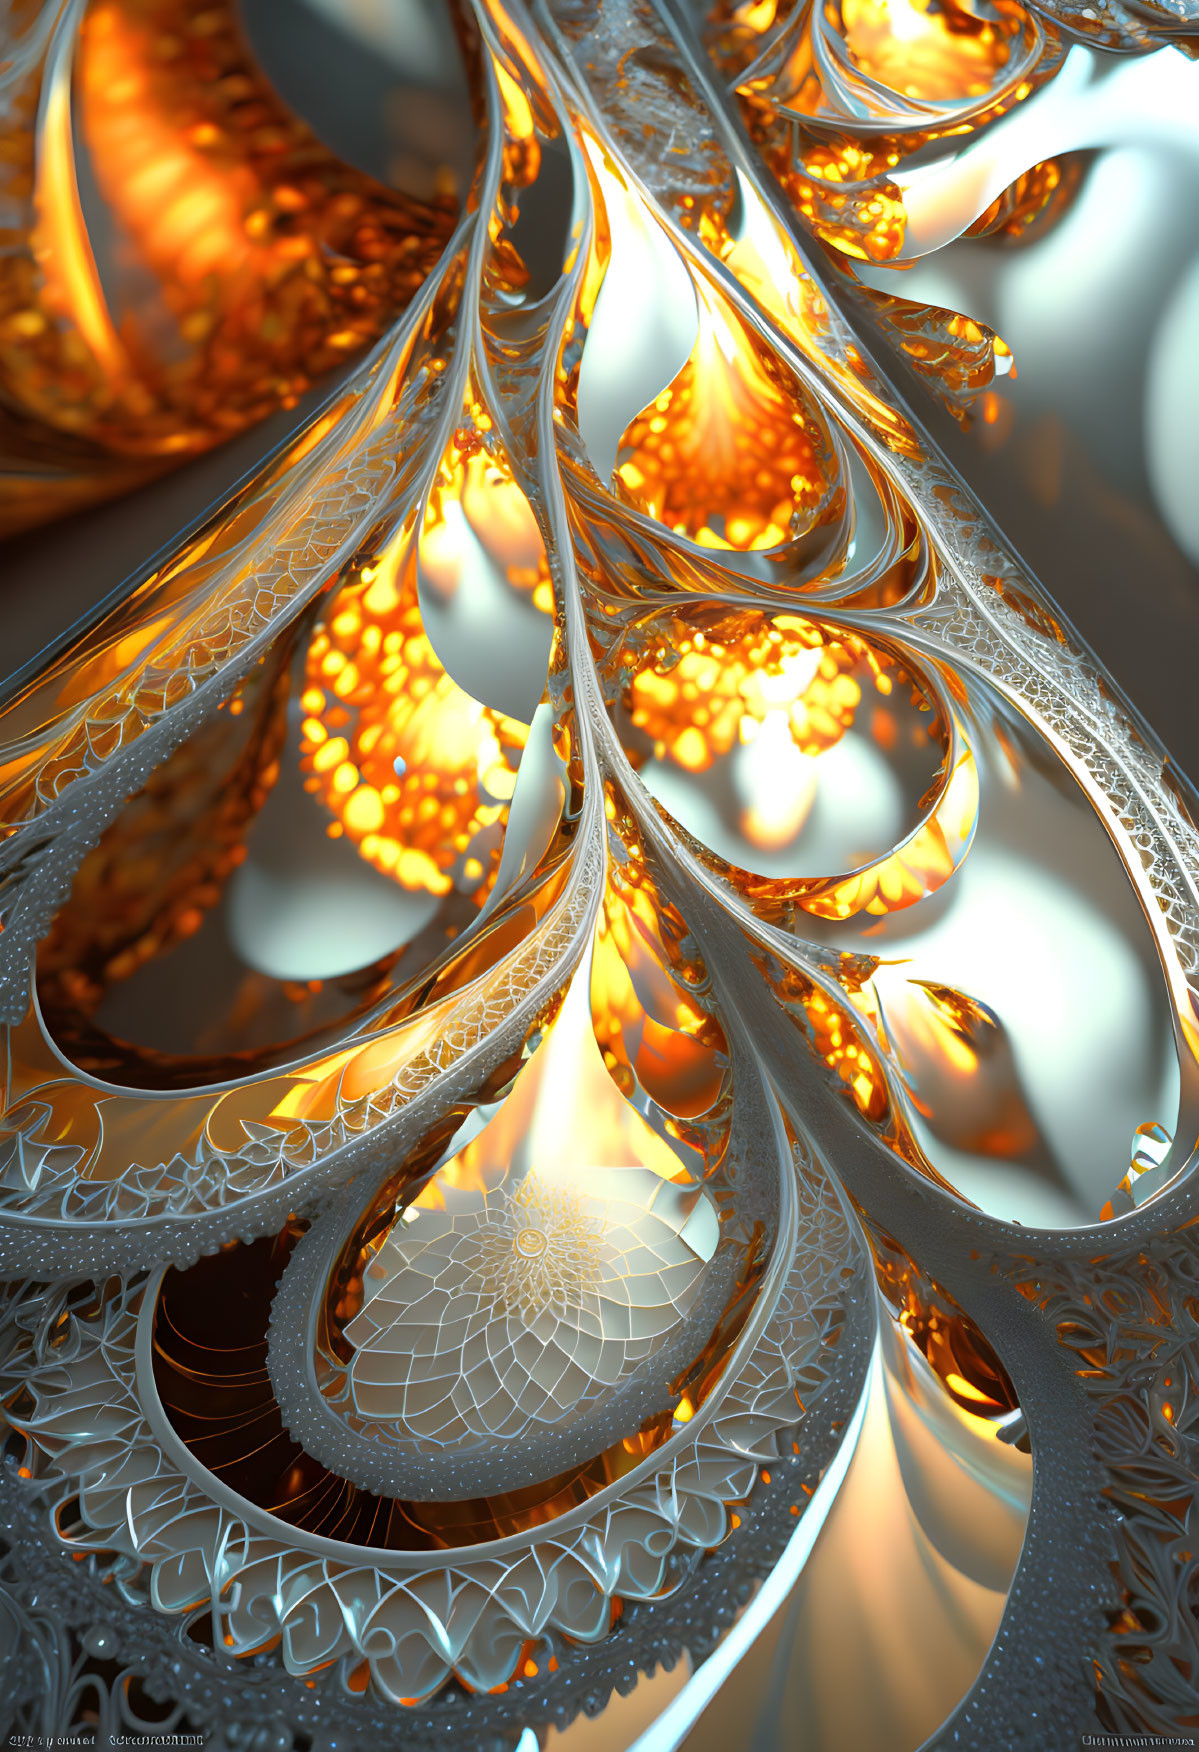 Intricate fractal image: fiery orange and cool silver tones